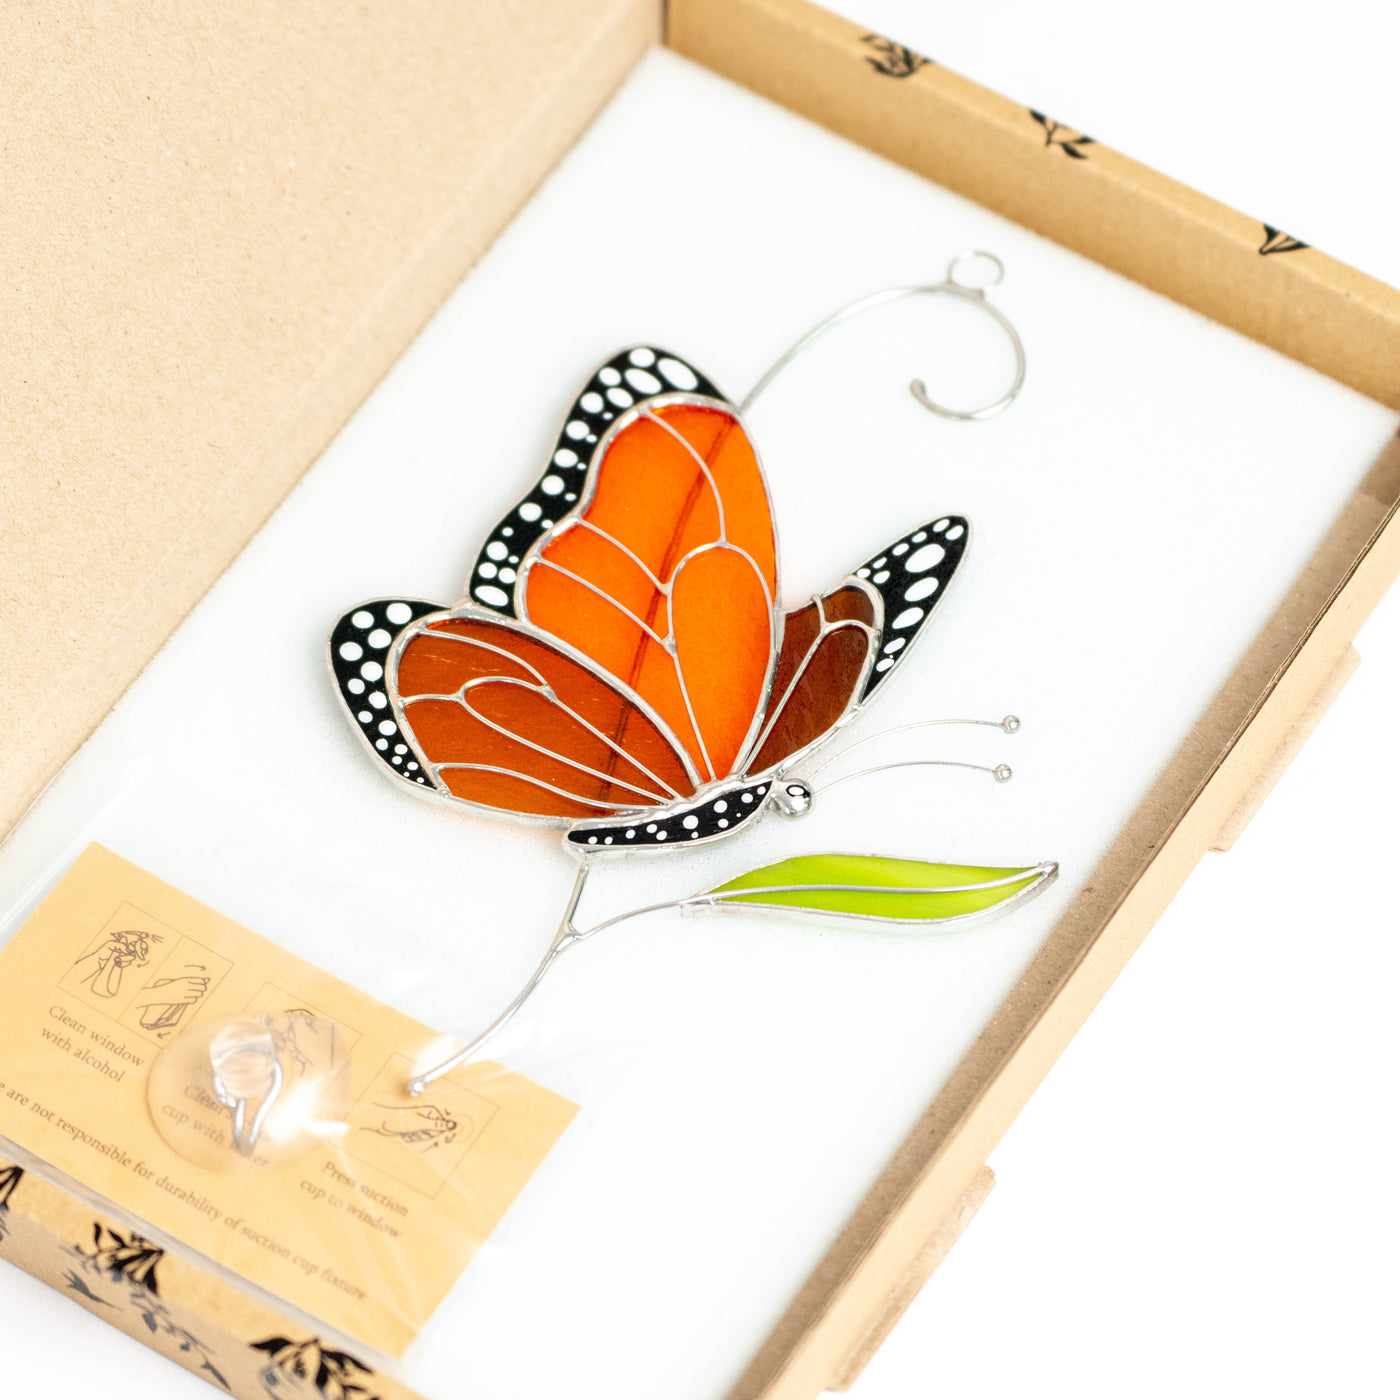 Stained glass monarch butterfly suncatcher in a brand box